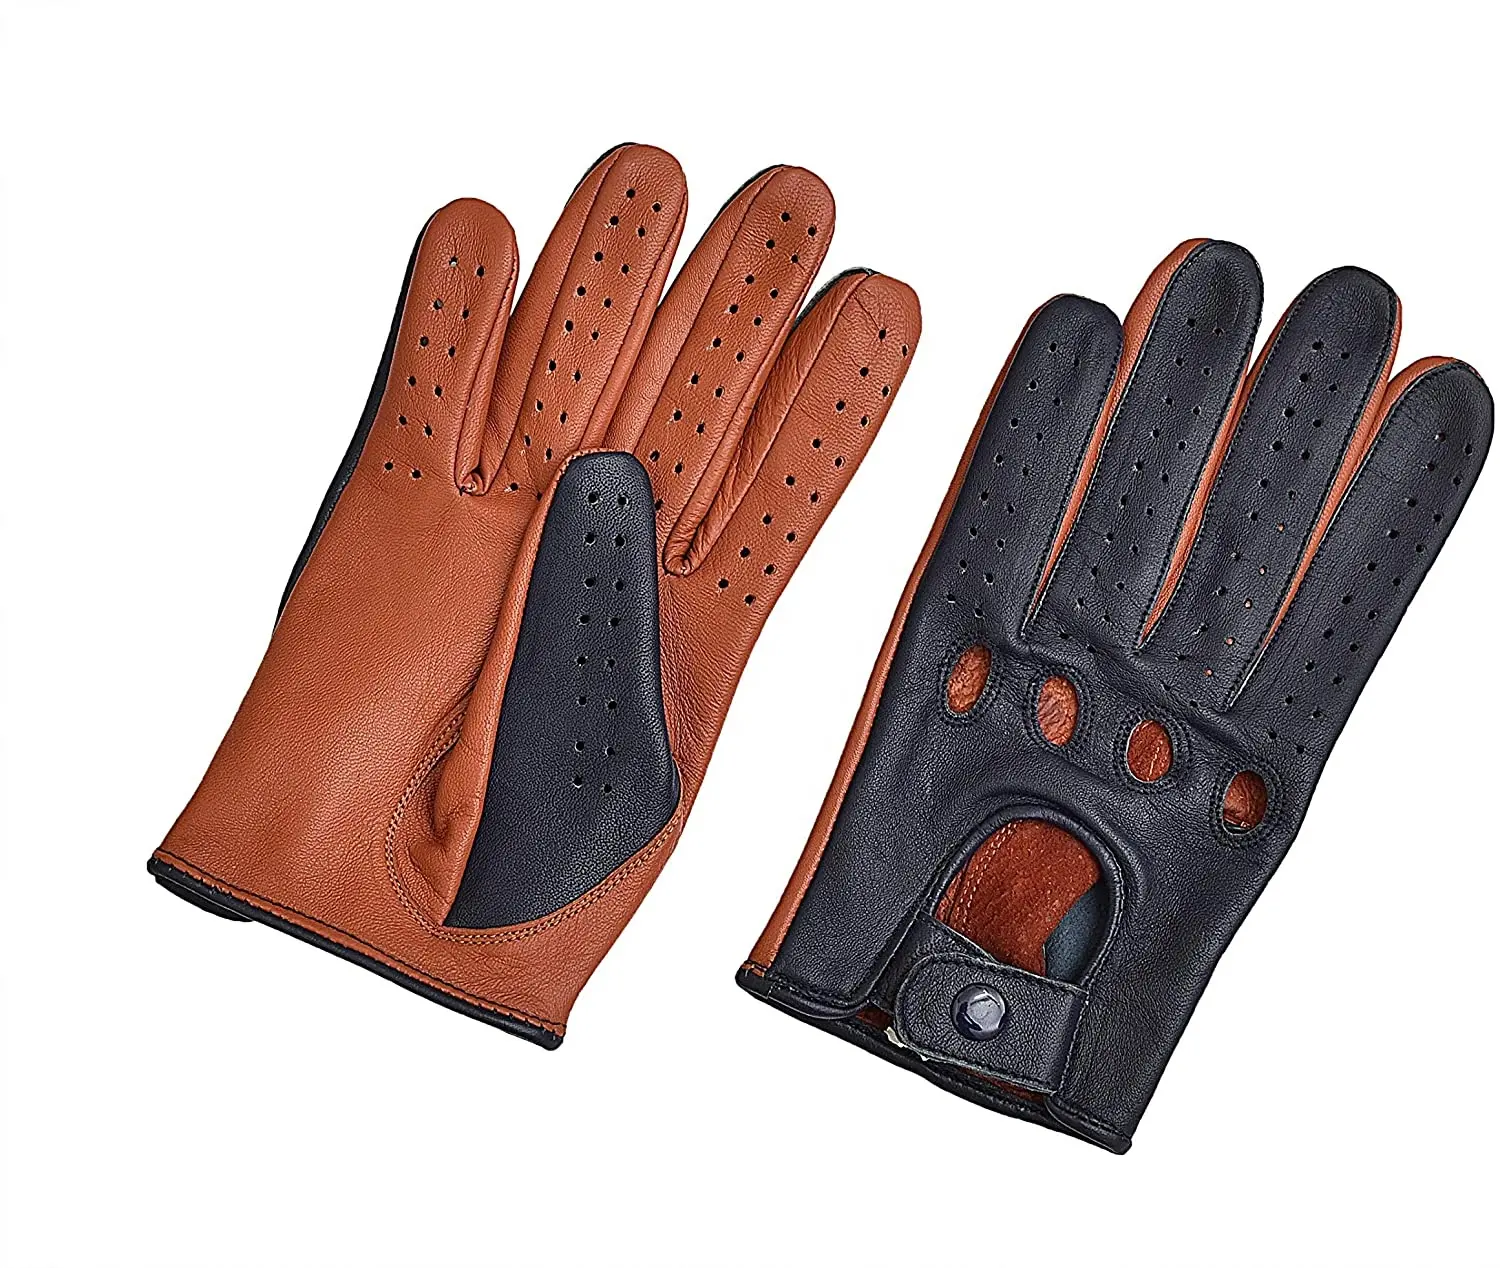 Newest Style Whole Sale Adult Size Soft Driving Fancy Fashion Leather Dressing Gloves Quality Protective Driving Gloves